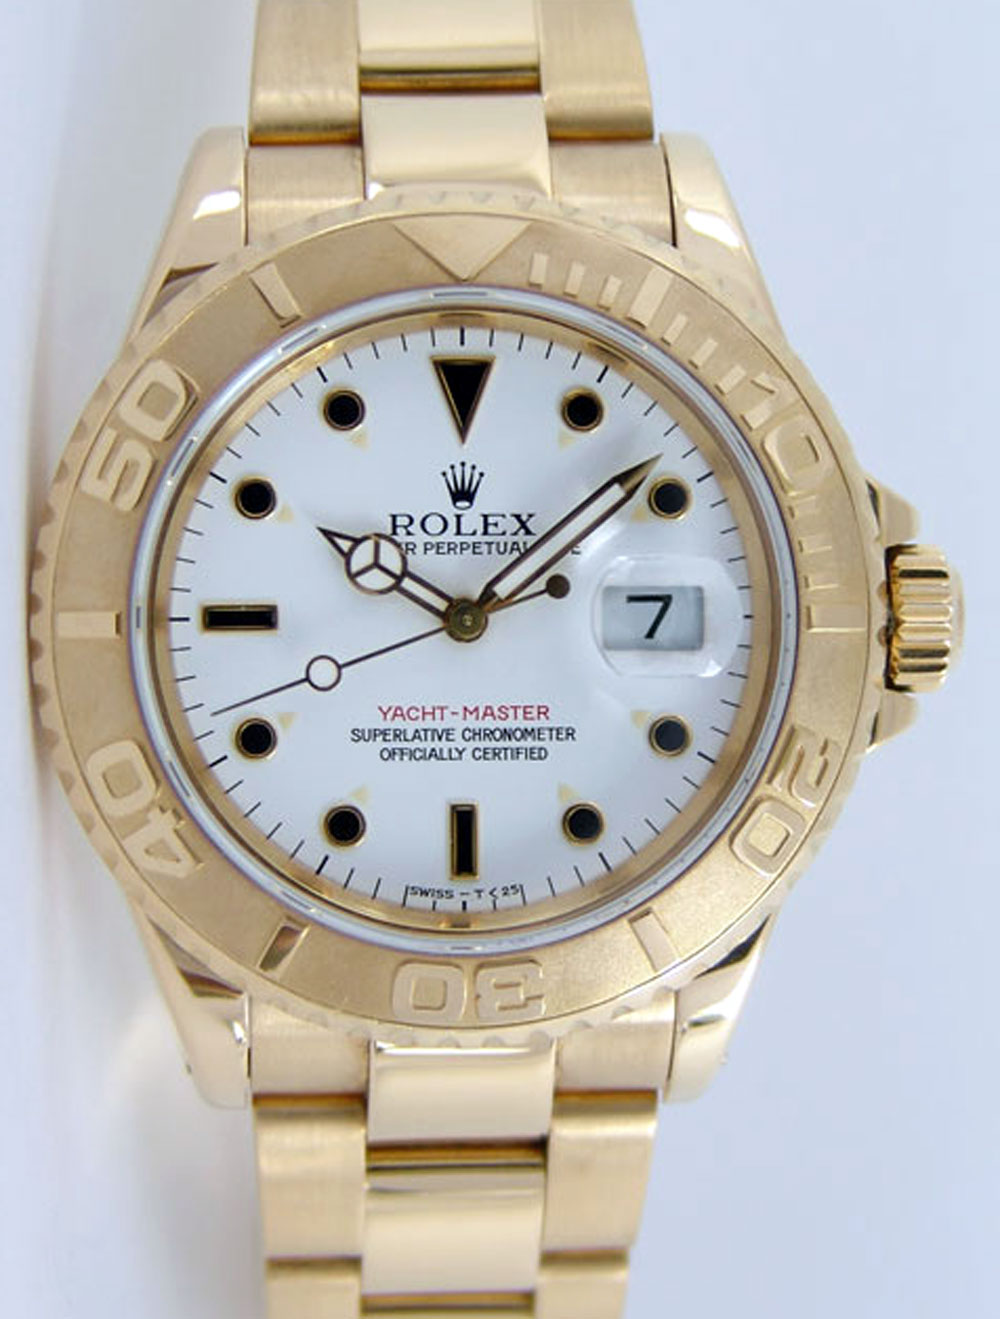 Rolex Yachtmaster Yellow Gold White Dial 40mm 16628 - WATCH CHEST | eBay